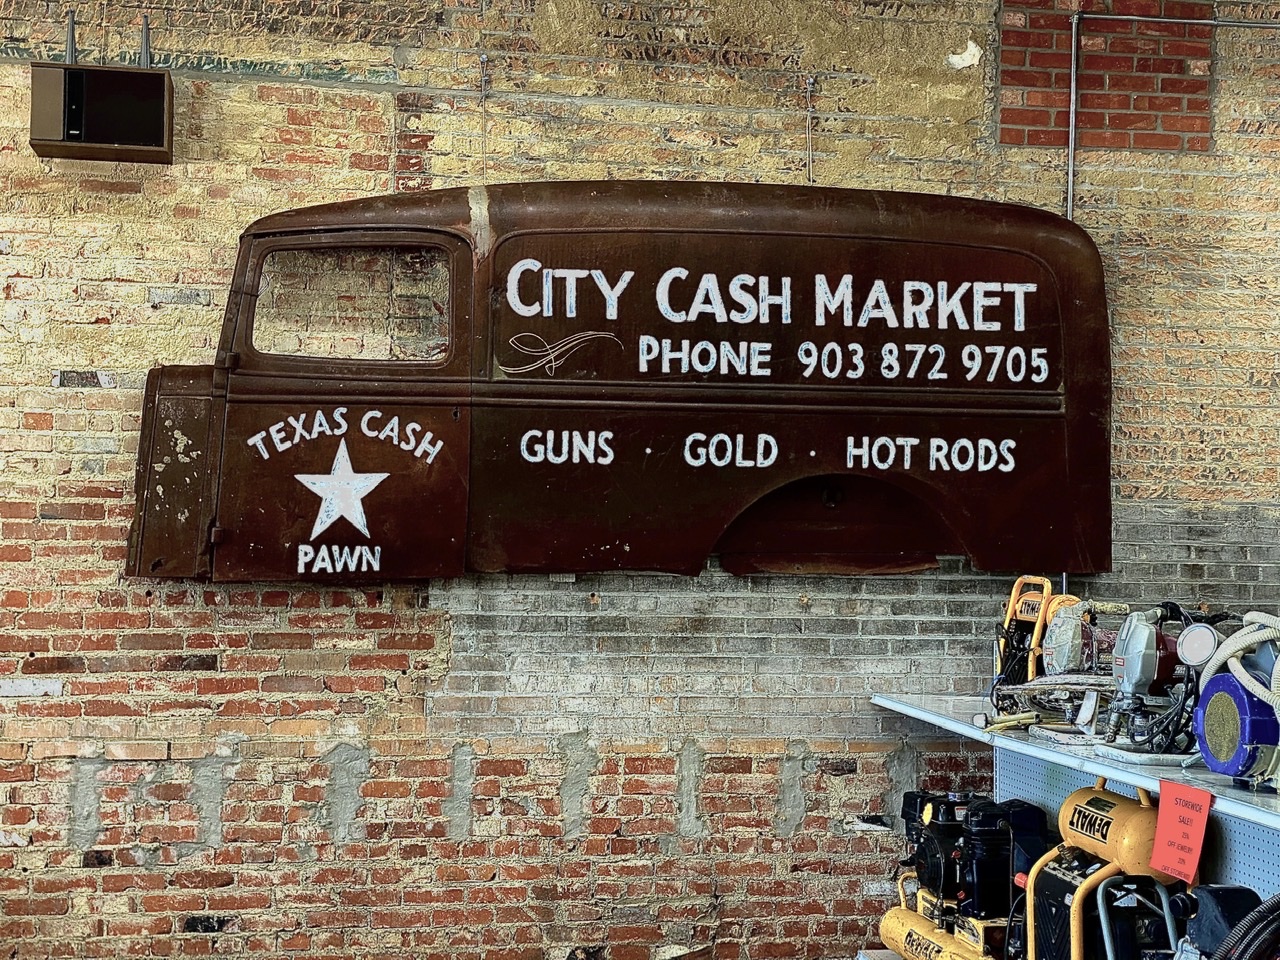 The side of an old metal truck painted with the words City Cash Market hangs on a brick wall. 